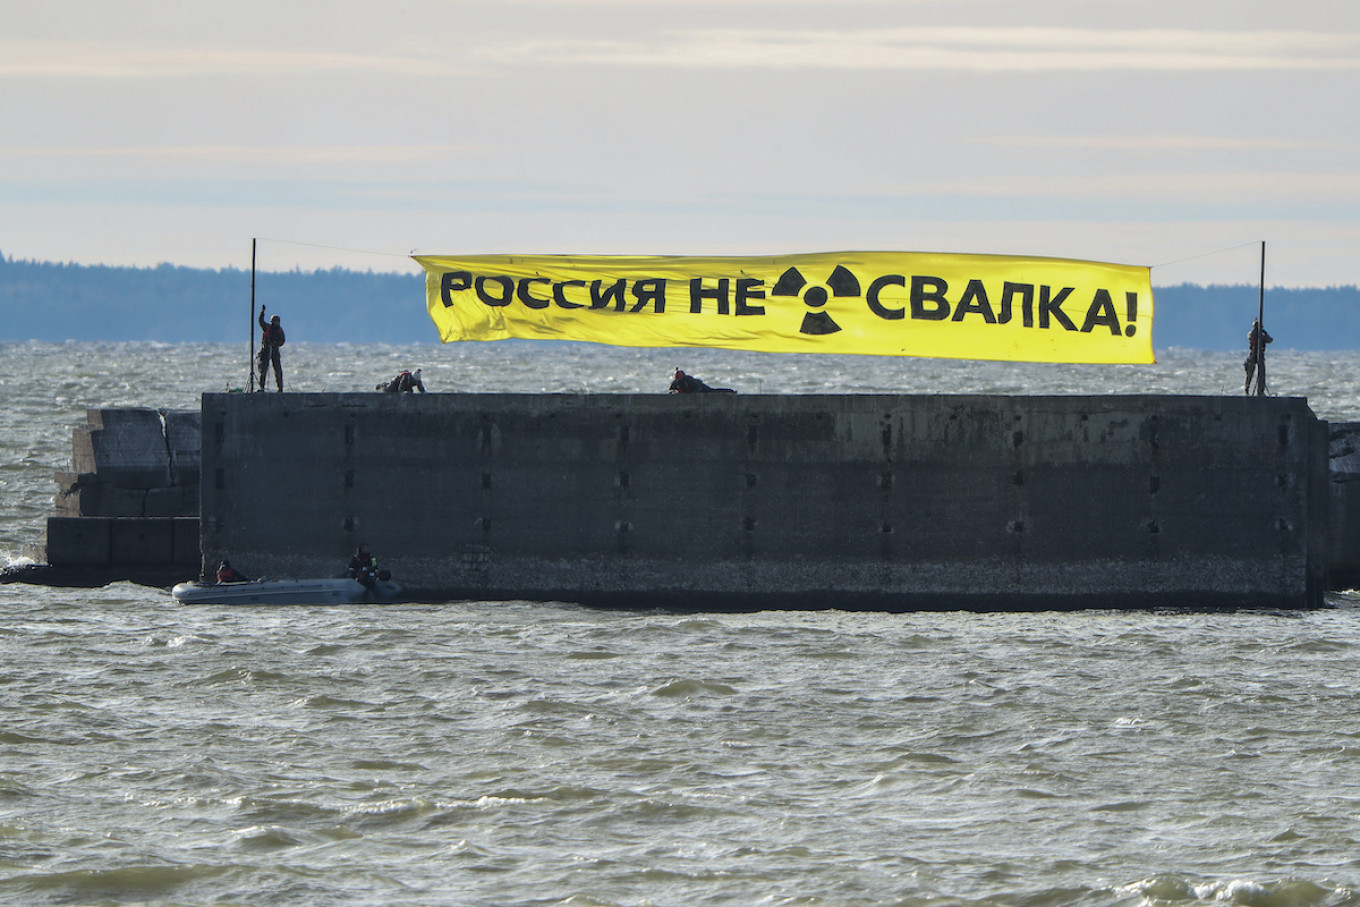 Russia’s Nuclear Waste Imports Likely Larger Than Declared – Greenpeace